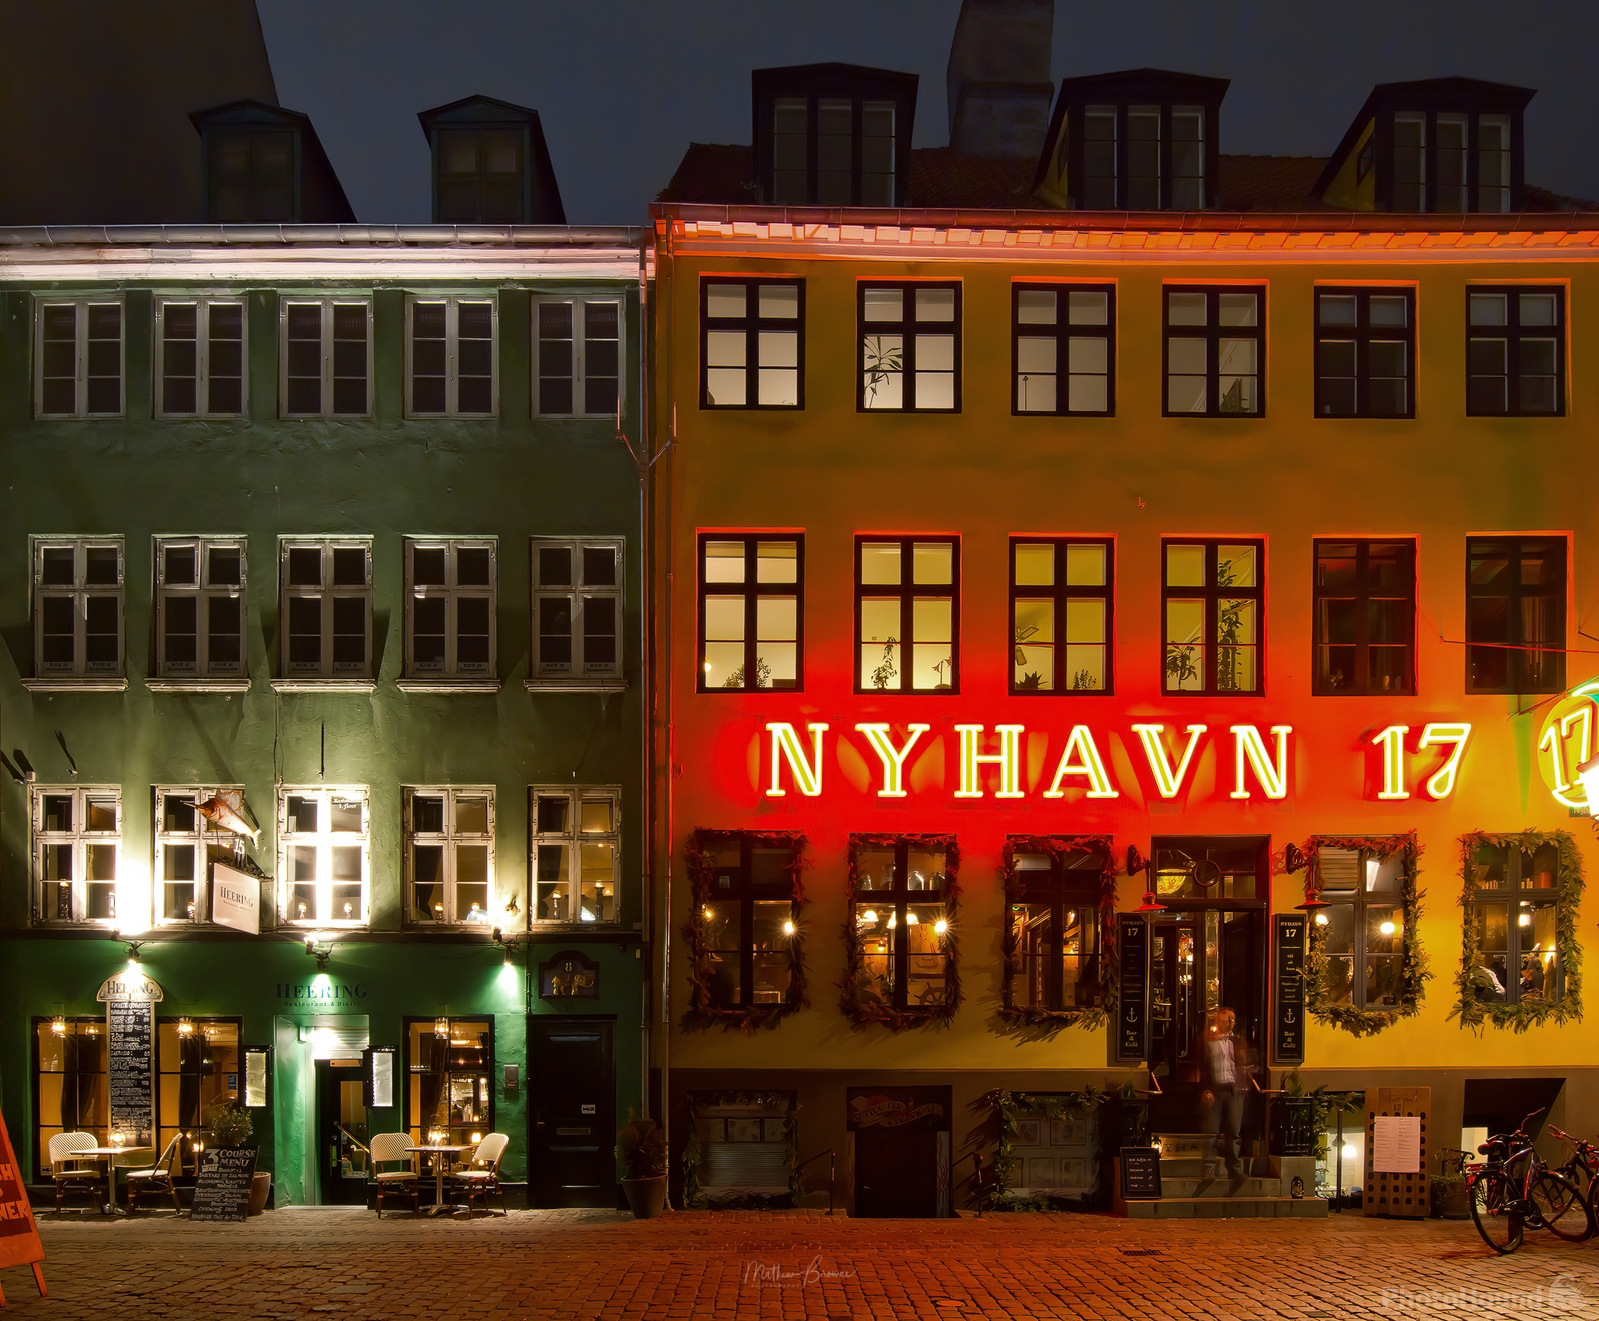 Image of Nyhavn Canal by Mathew Browne